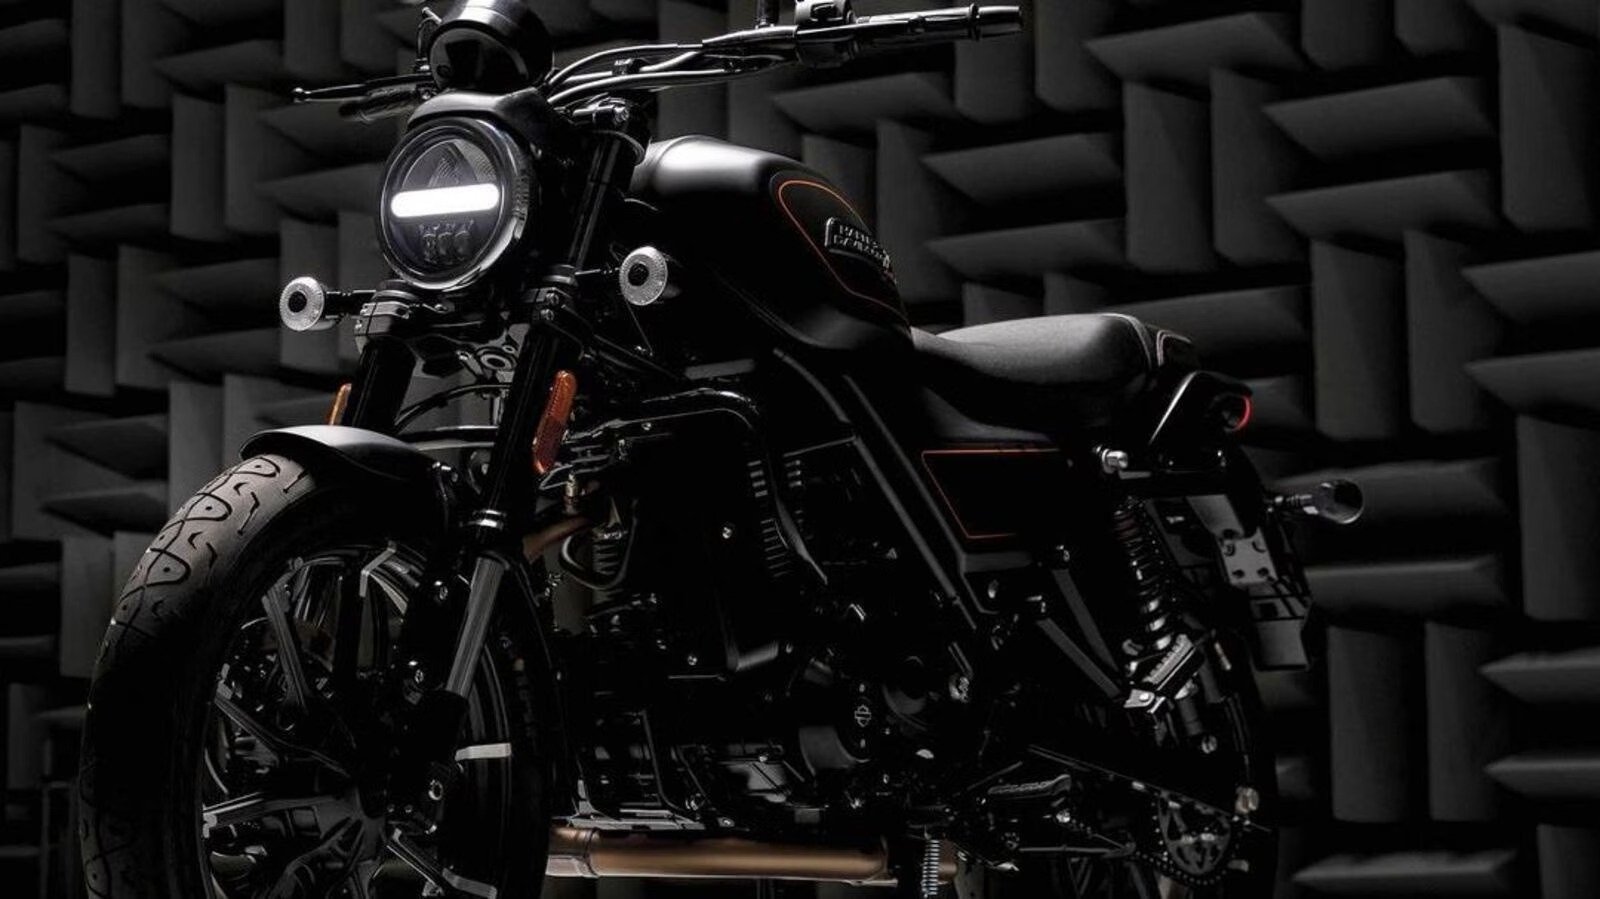 Hero's new 440cc bike is coming in a few days to give tough competition to Royal Enfield.